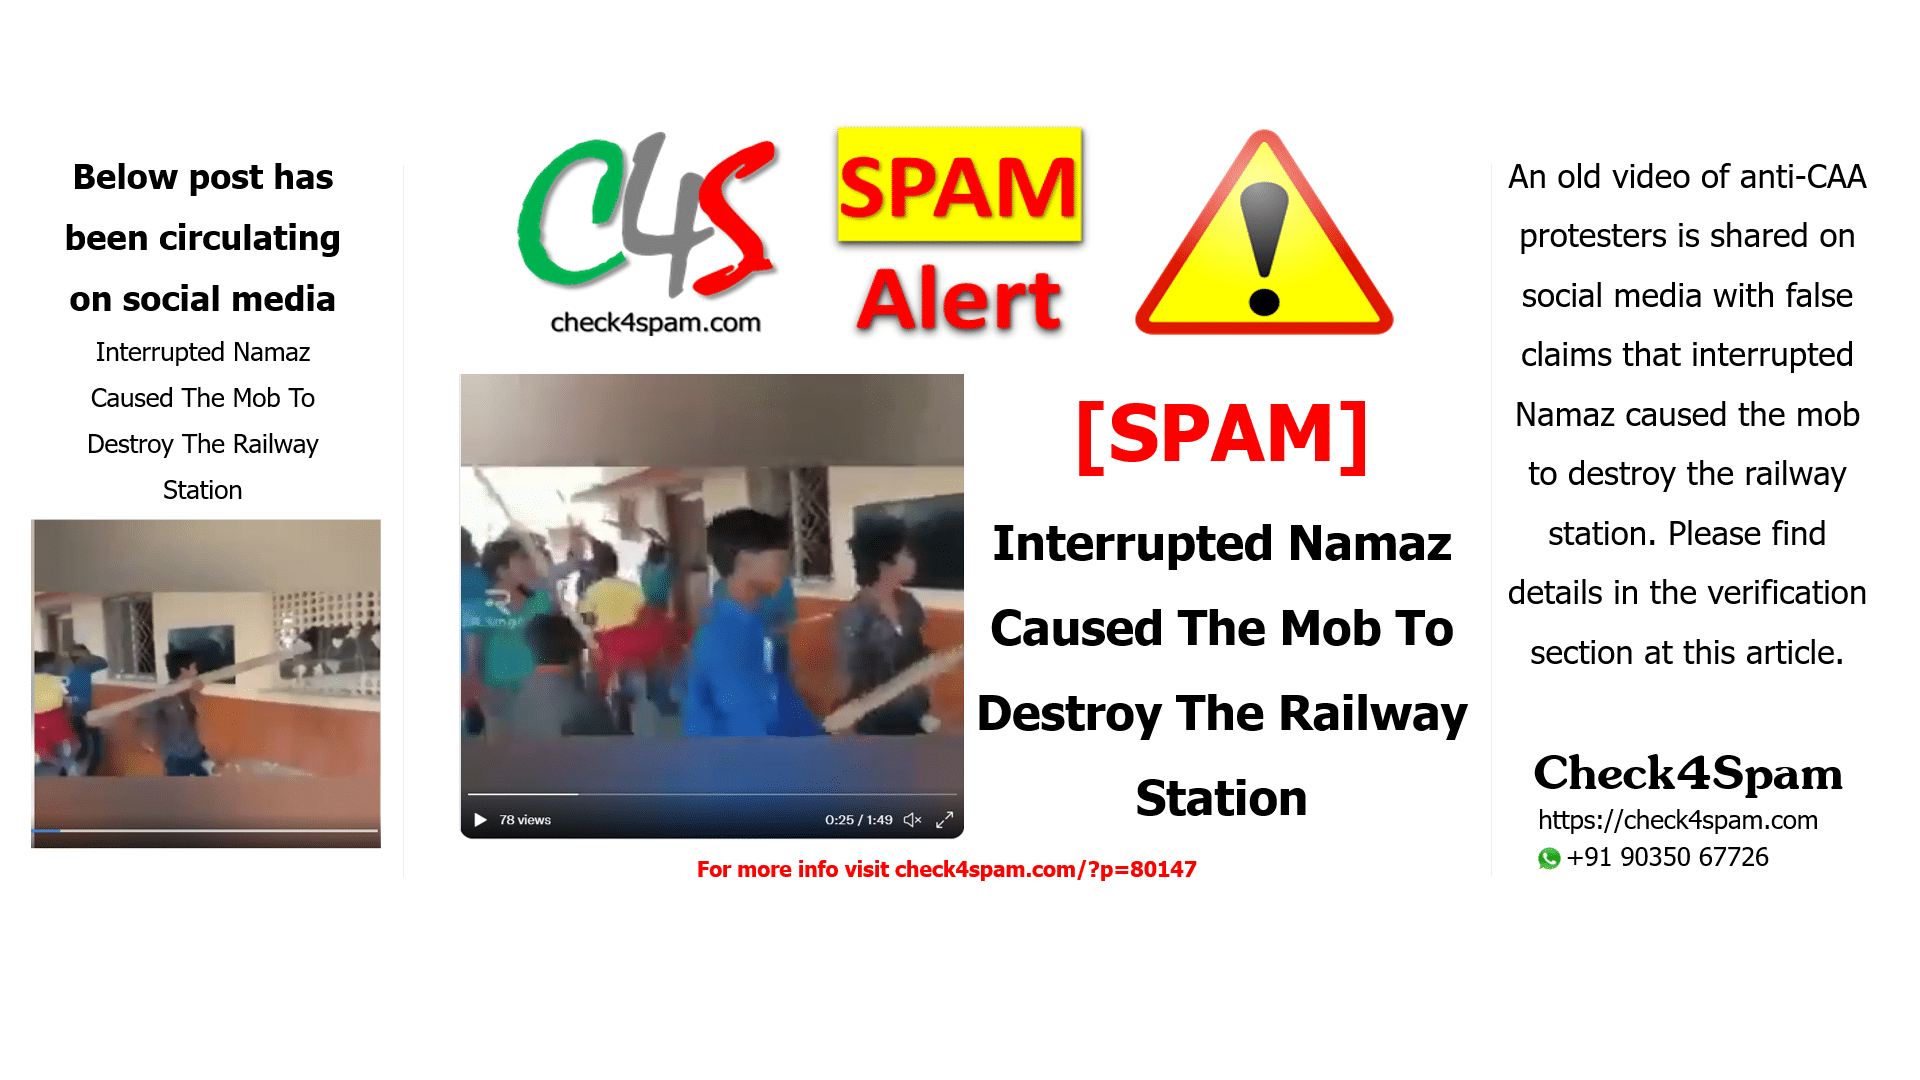 Interrupted Namaz Caused The Mob To Destroy The Railway Station